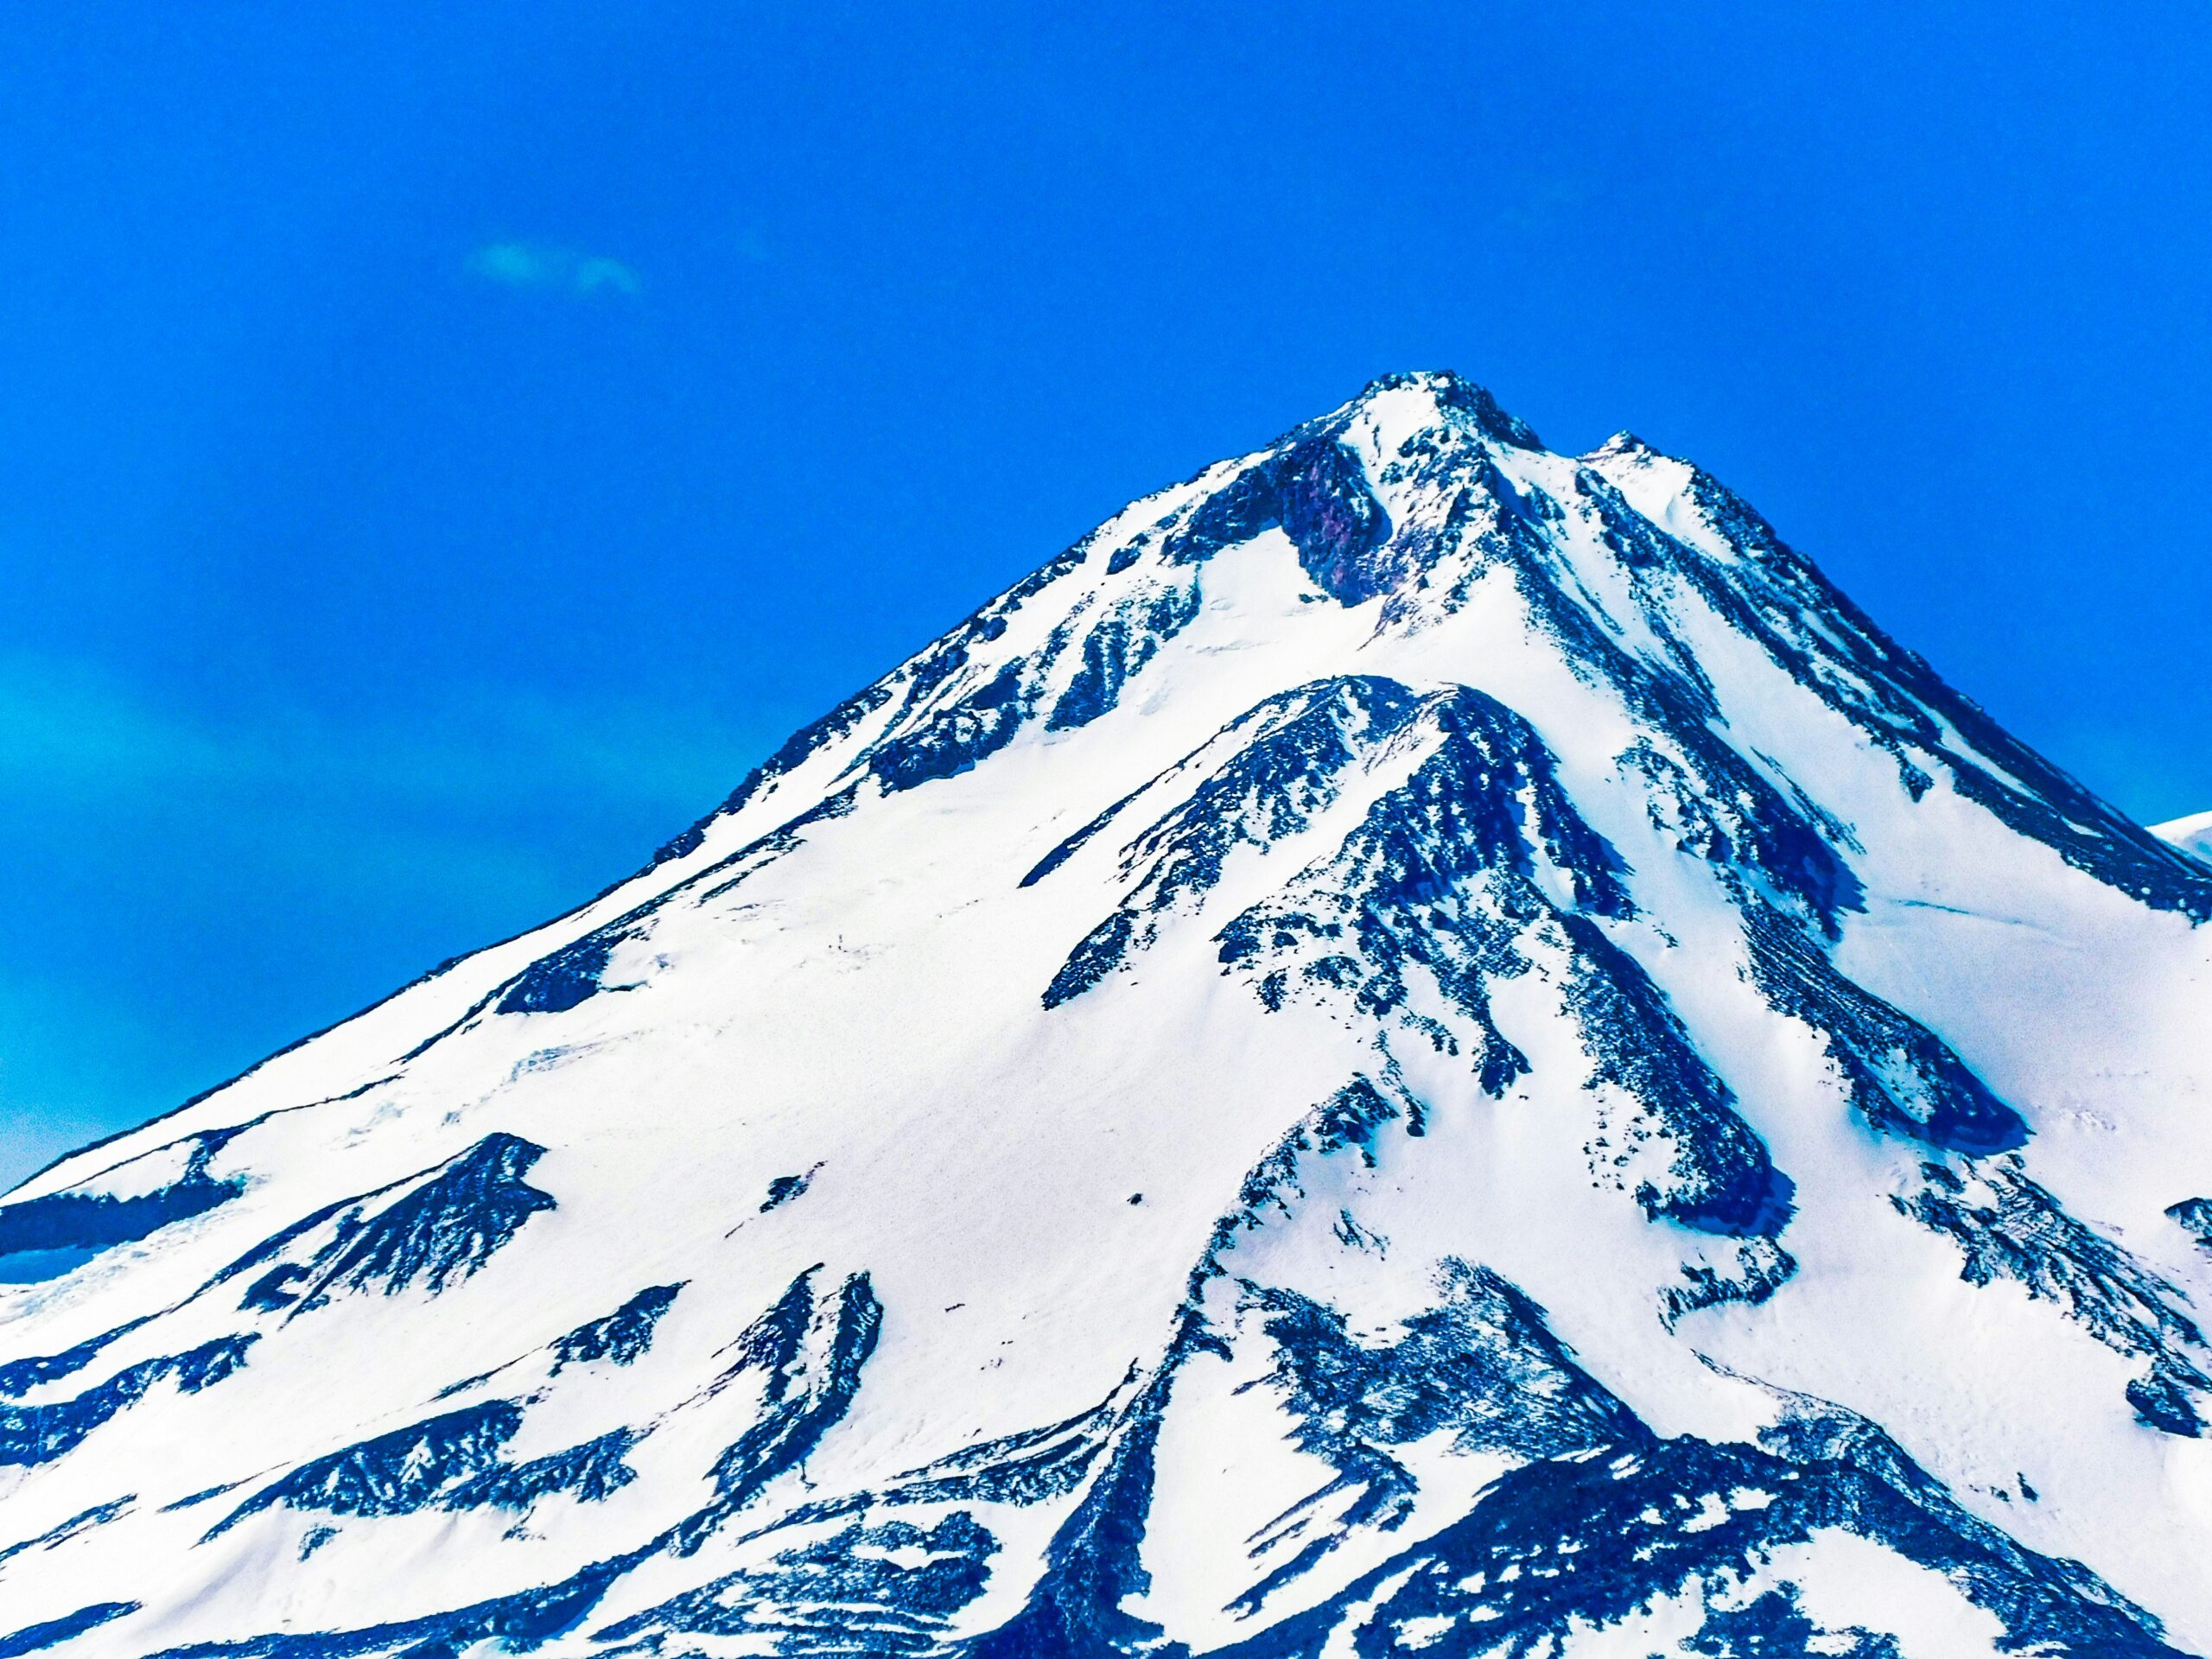 How Many Hiking Trails Are There On Mount Shasta?